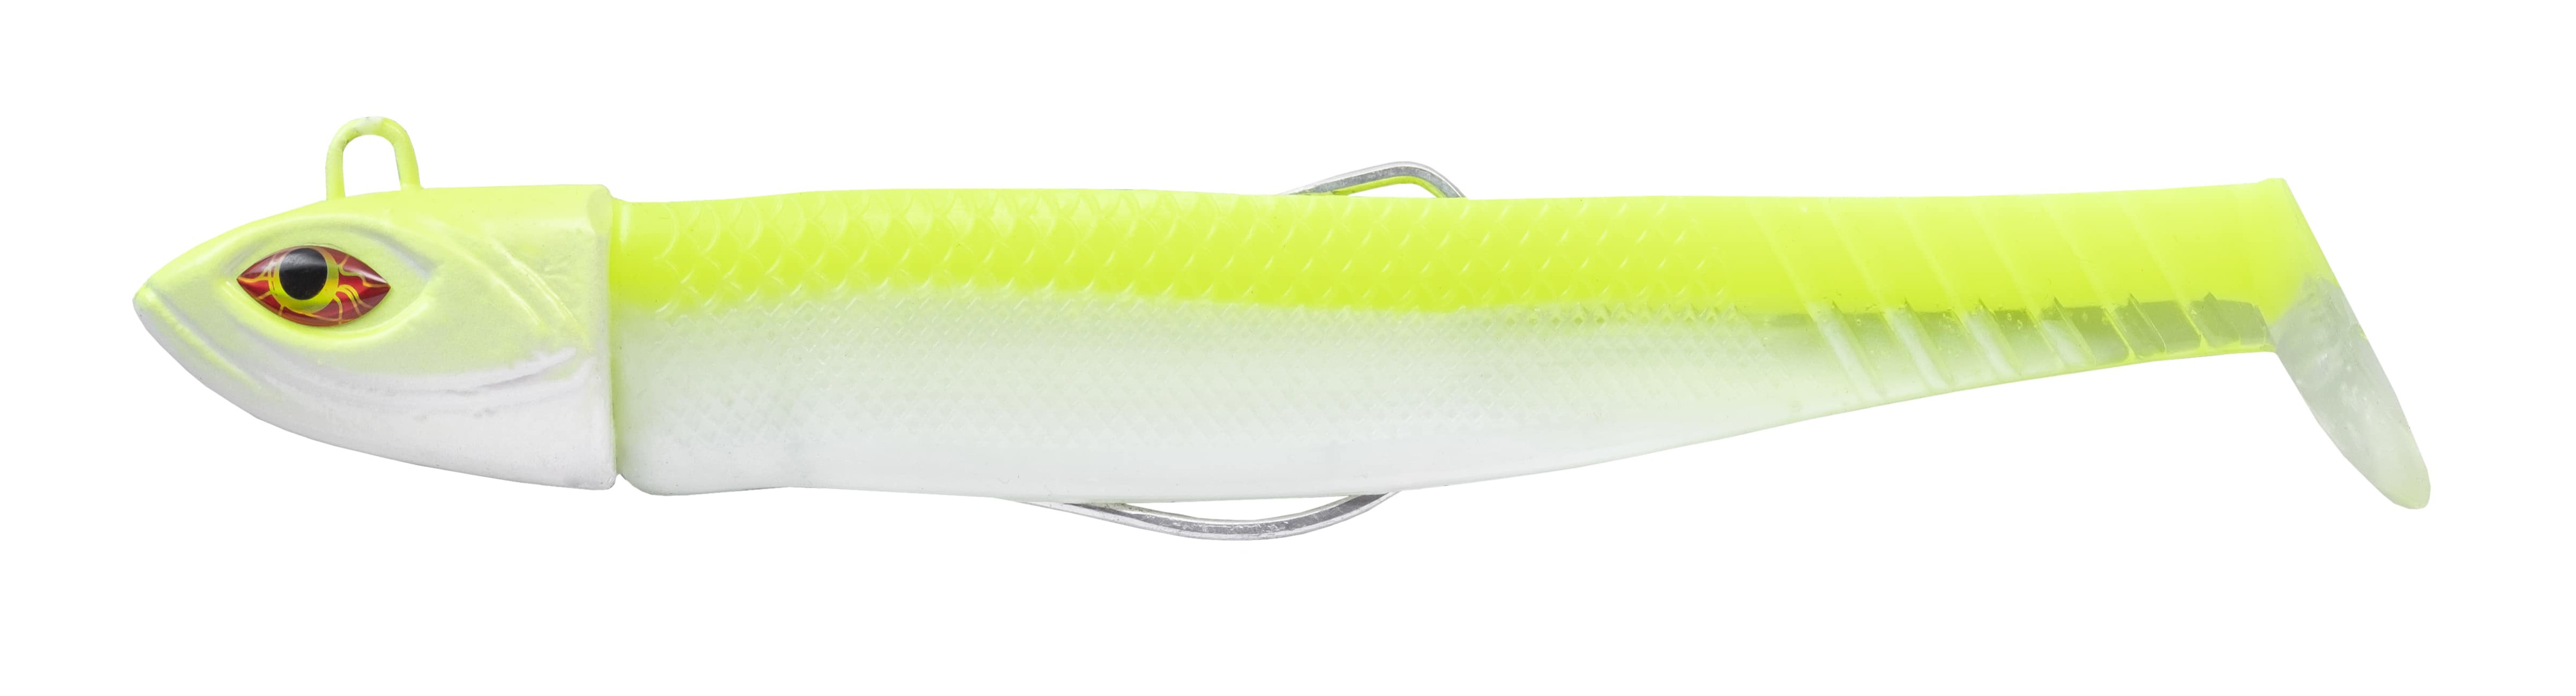 Cinnetic Crafty Candy Shad White Chartreuse 10.5cm (25g) (2 stuks)